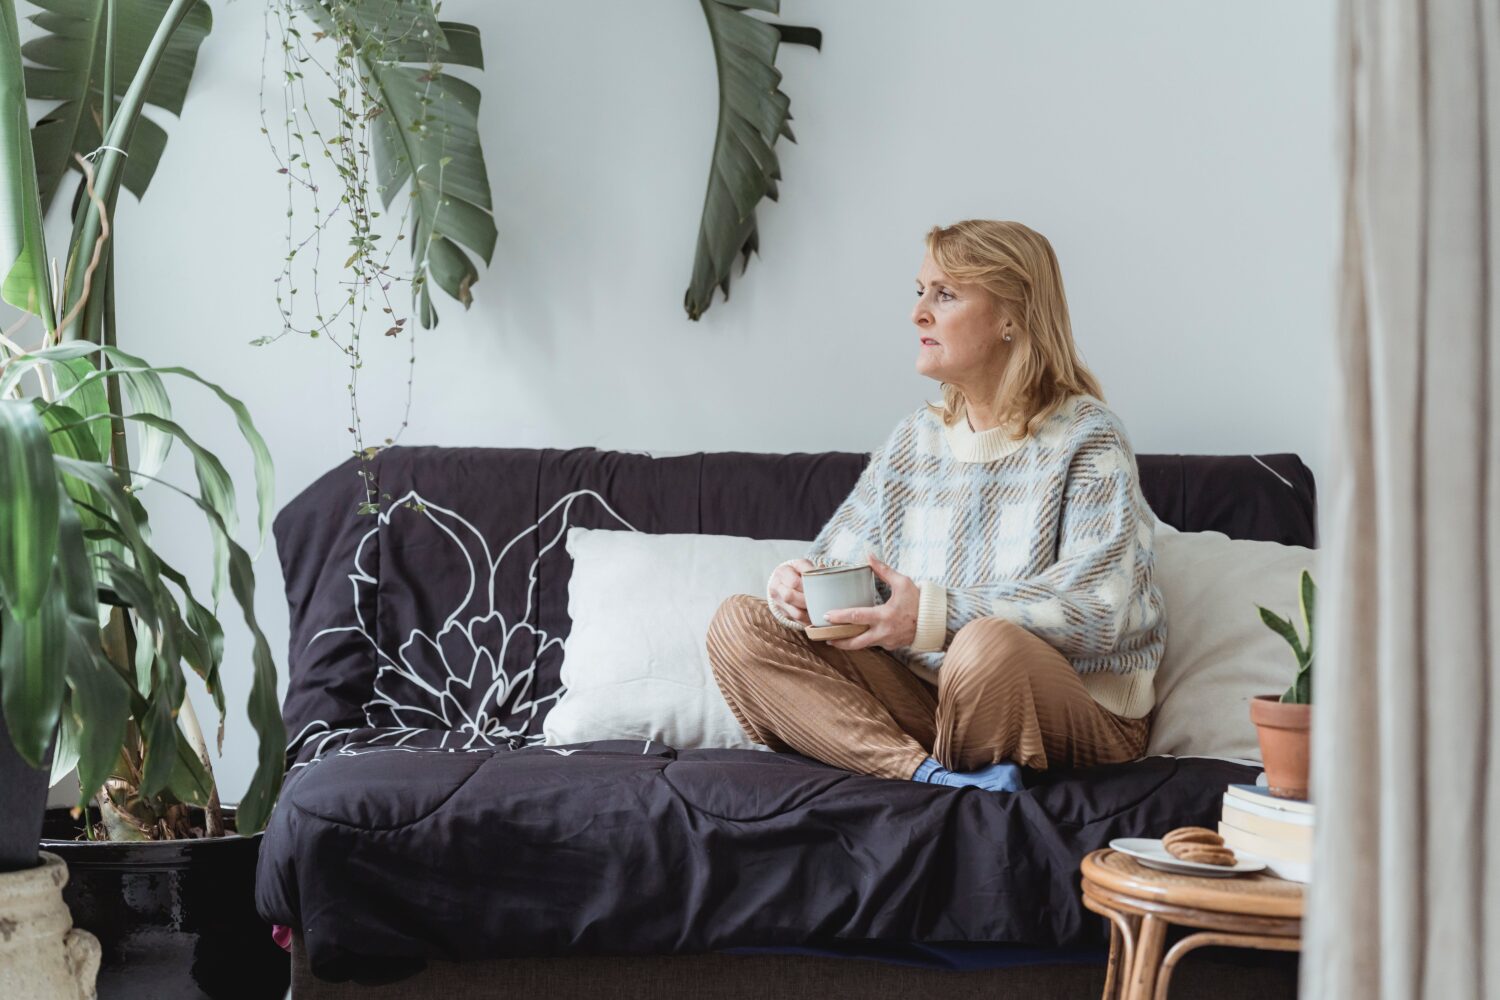 debloat, Blonde middle aged woman sits with her legs crossed and a cup of tea in her hands on a black couch with white pillows.